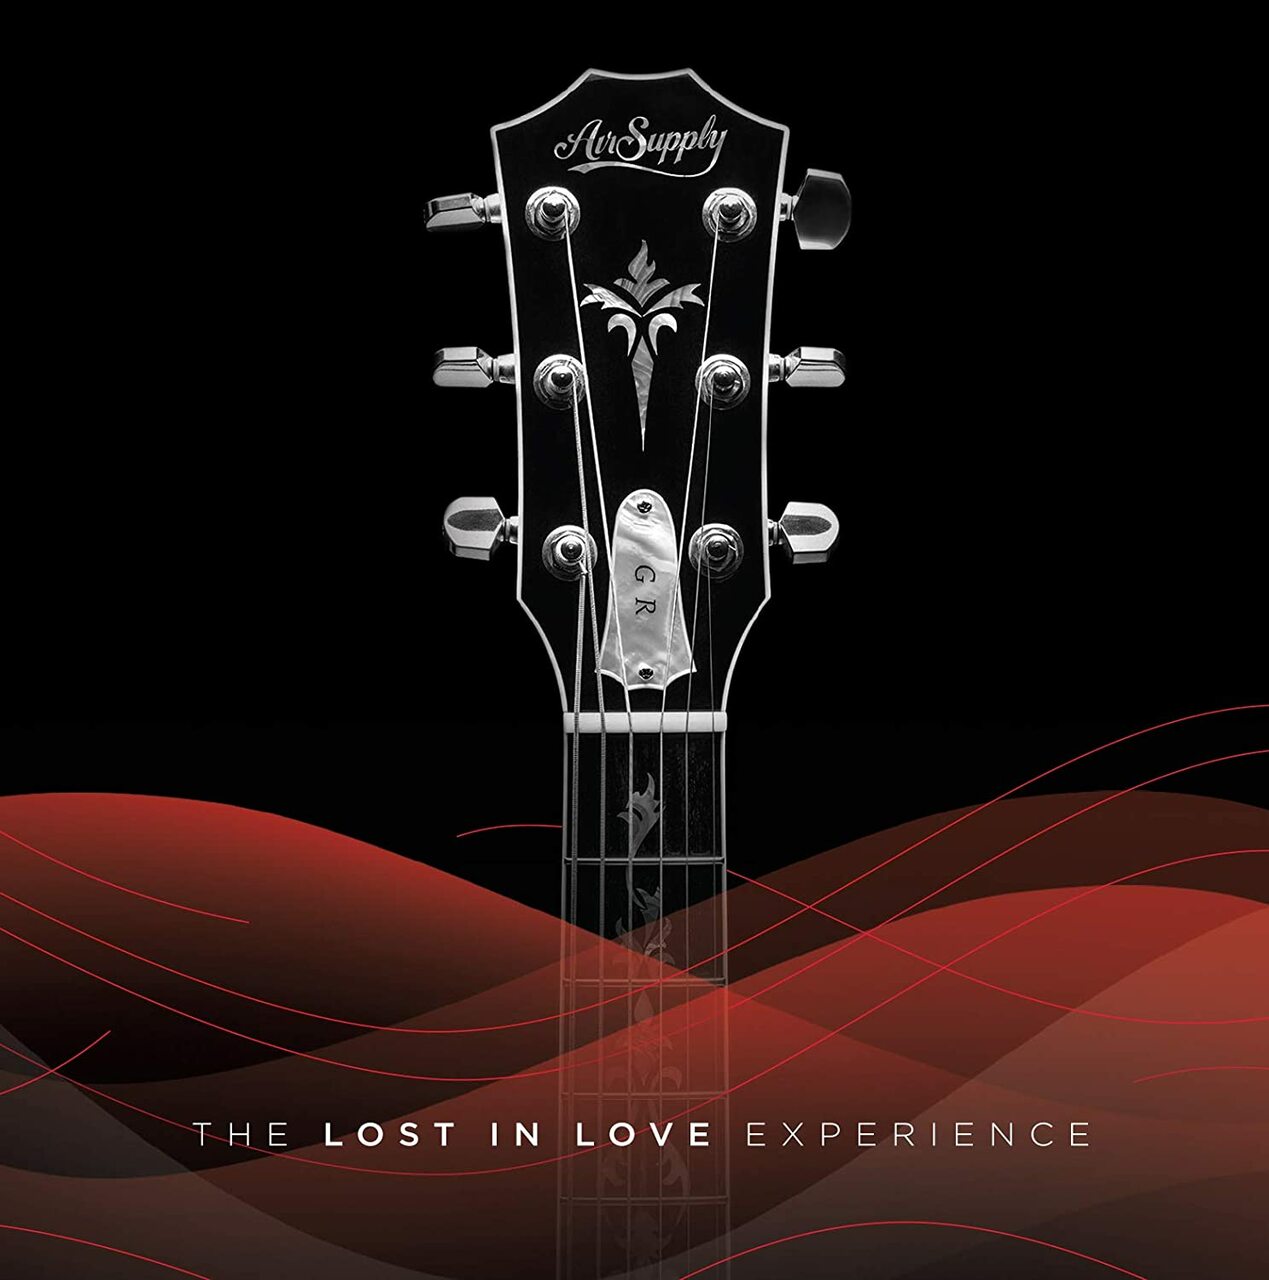 the lost in love experience air supply